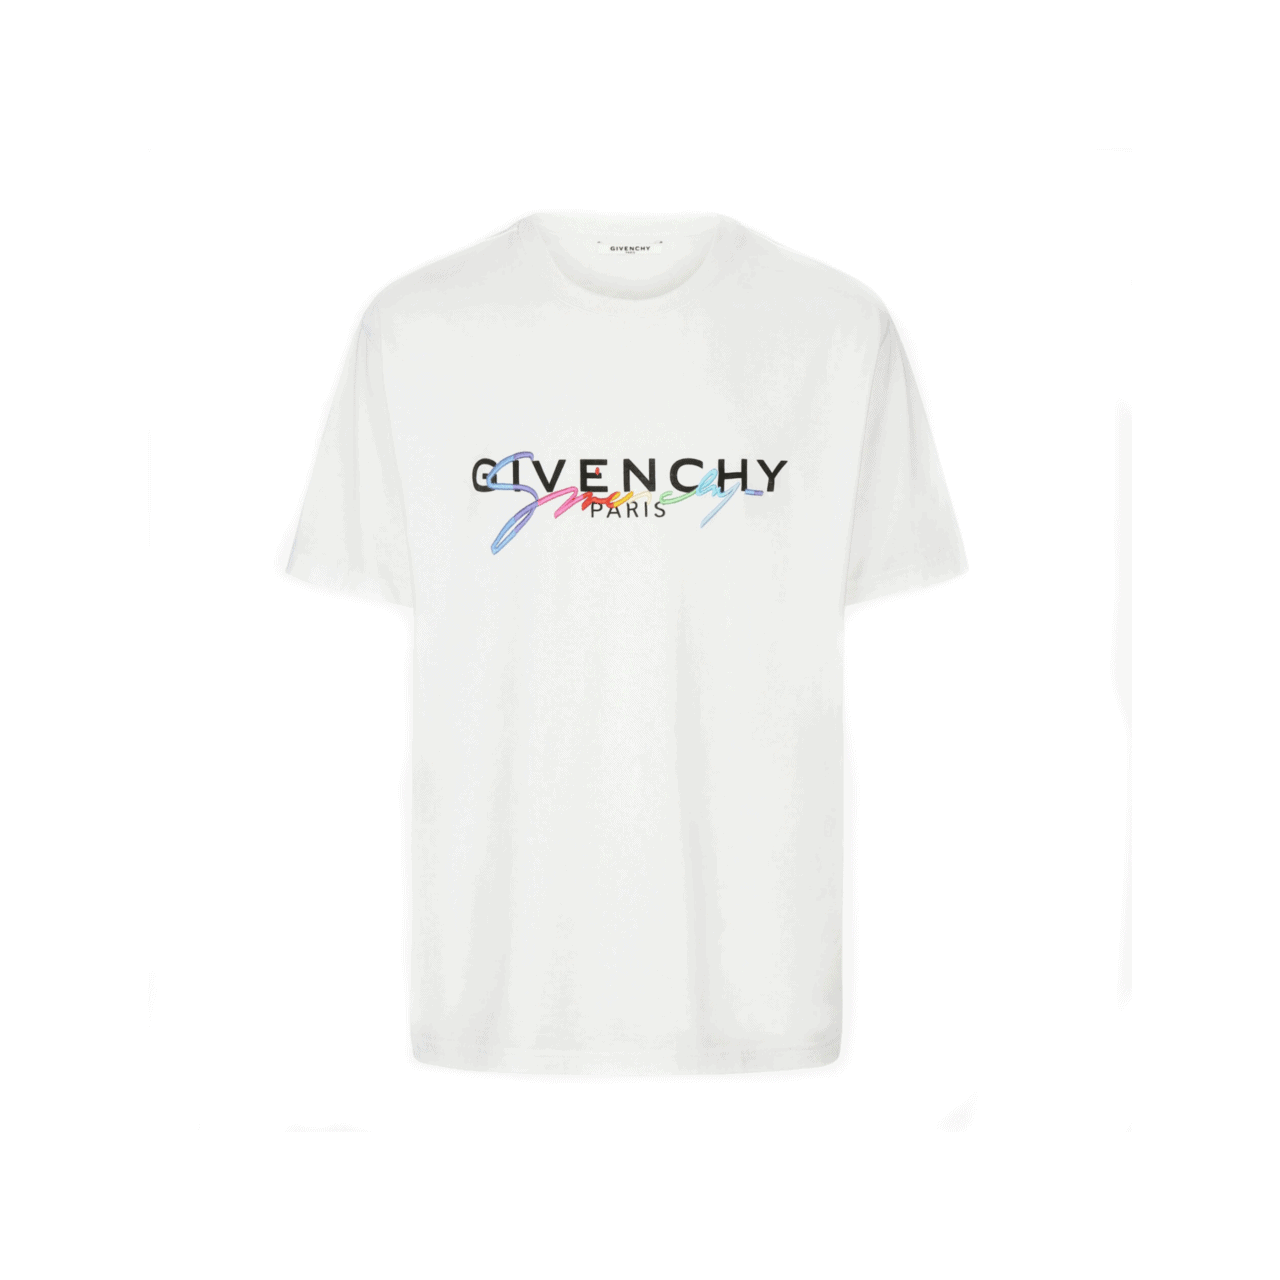 Justitie Tram de wind is sterk GIVENCHY RAINBOW SIGNATURE COTTON T-SHIRT - GVC5 - RepGod.RU/ORG/IS -  Trusted Replica Products - ReplicaGods